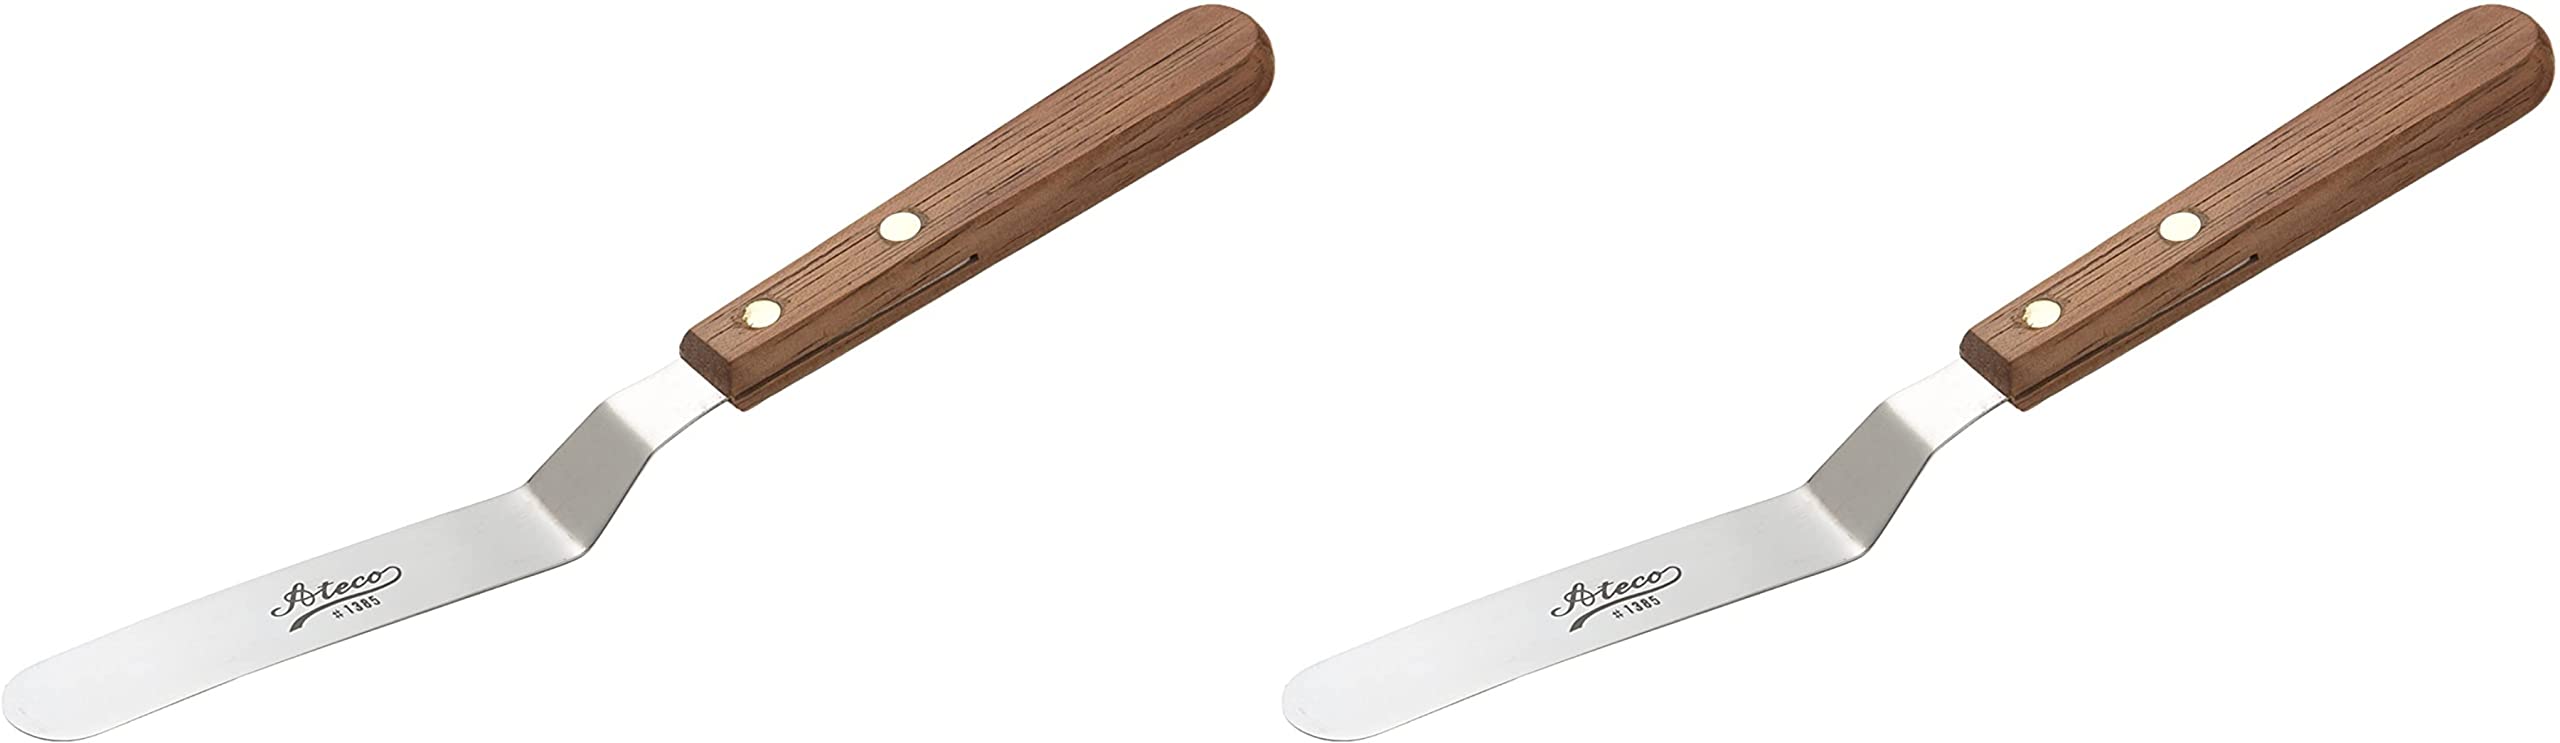 Ateco 1385 Spatula Icing Frosting Spreader Decorating Tool - Wood Handle, by Harold Imports